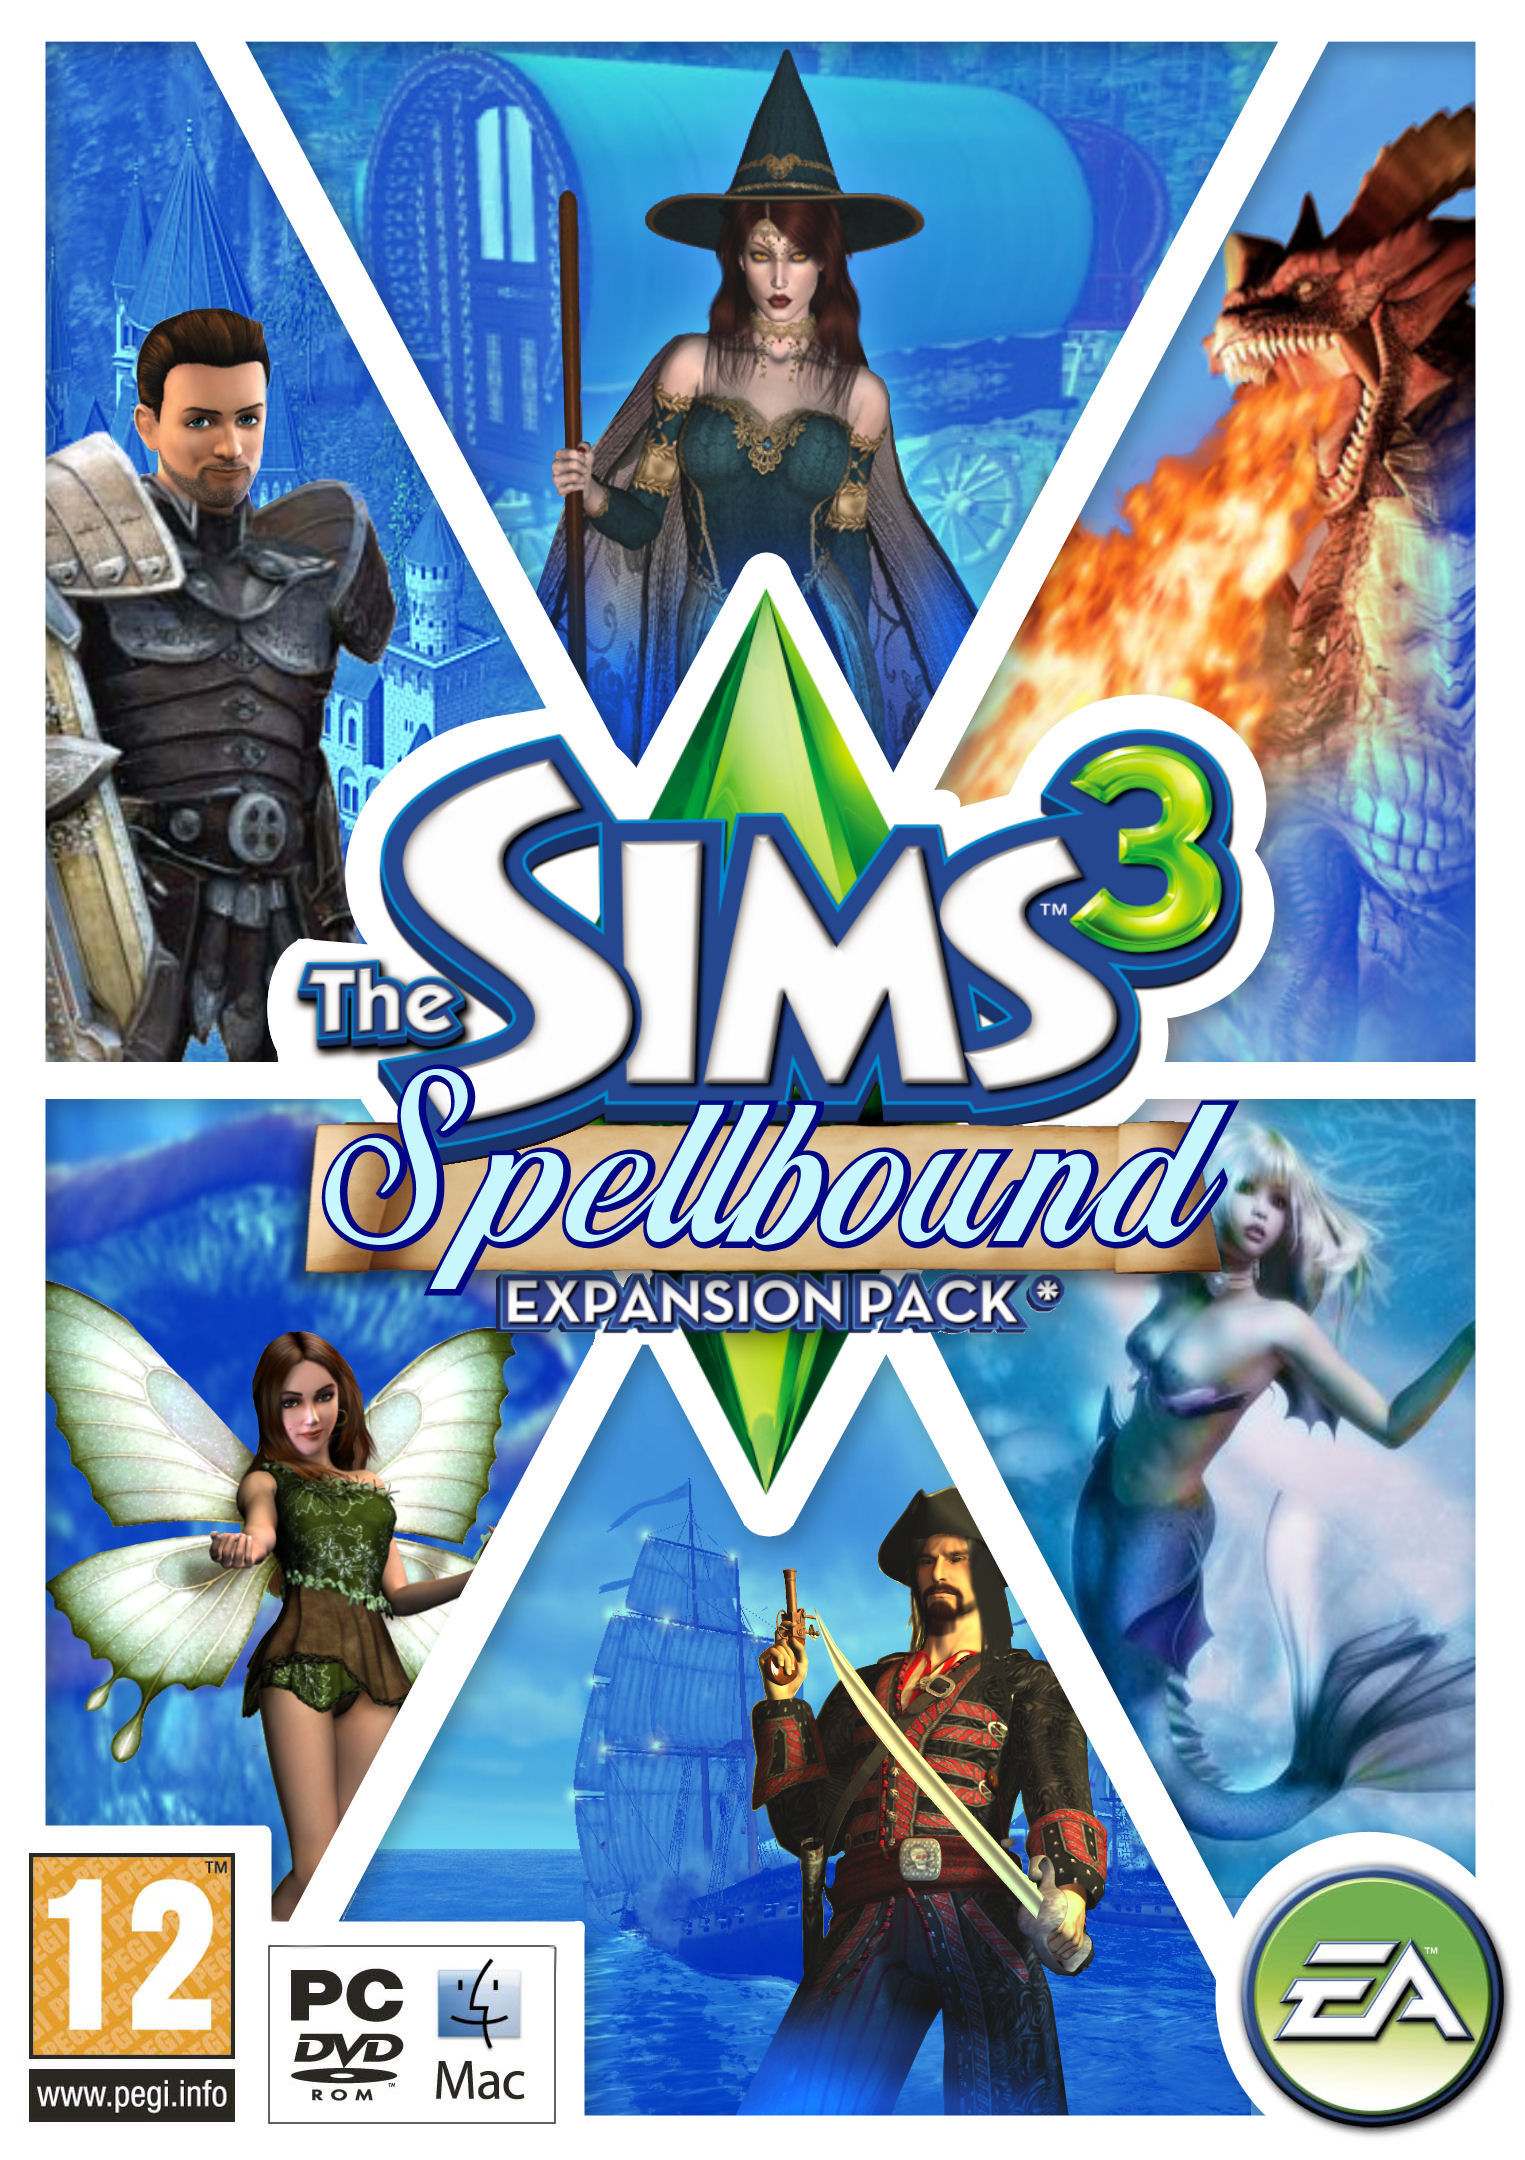 sims 4 expansion packs not download 2018